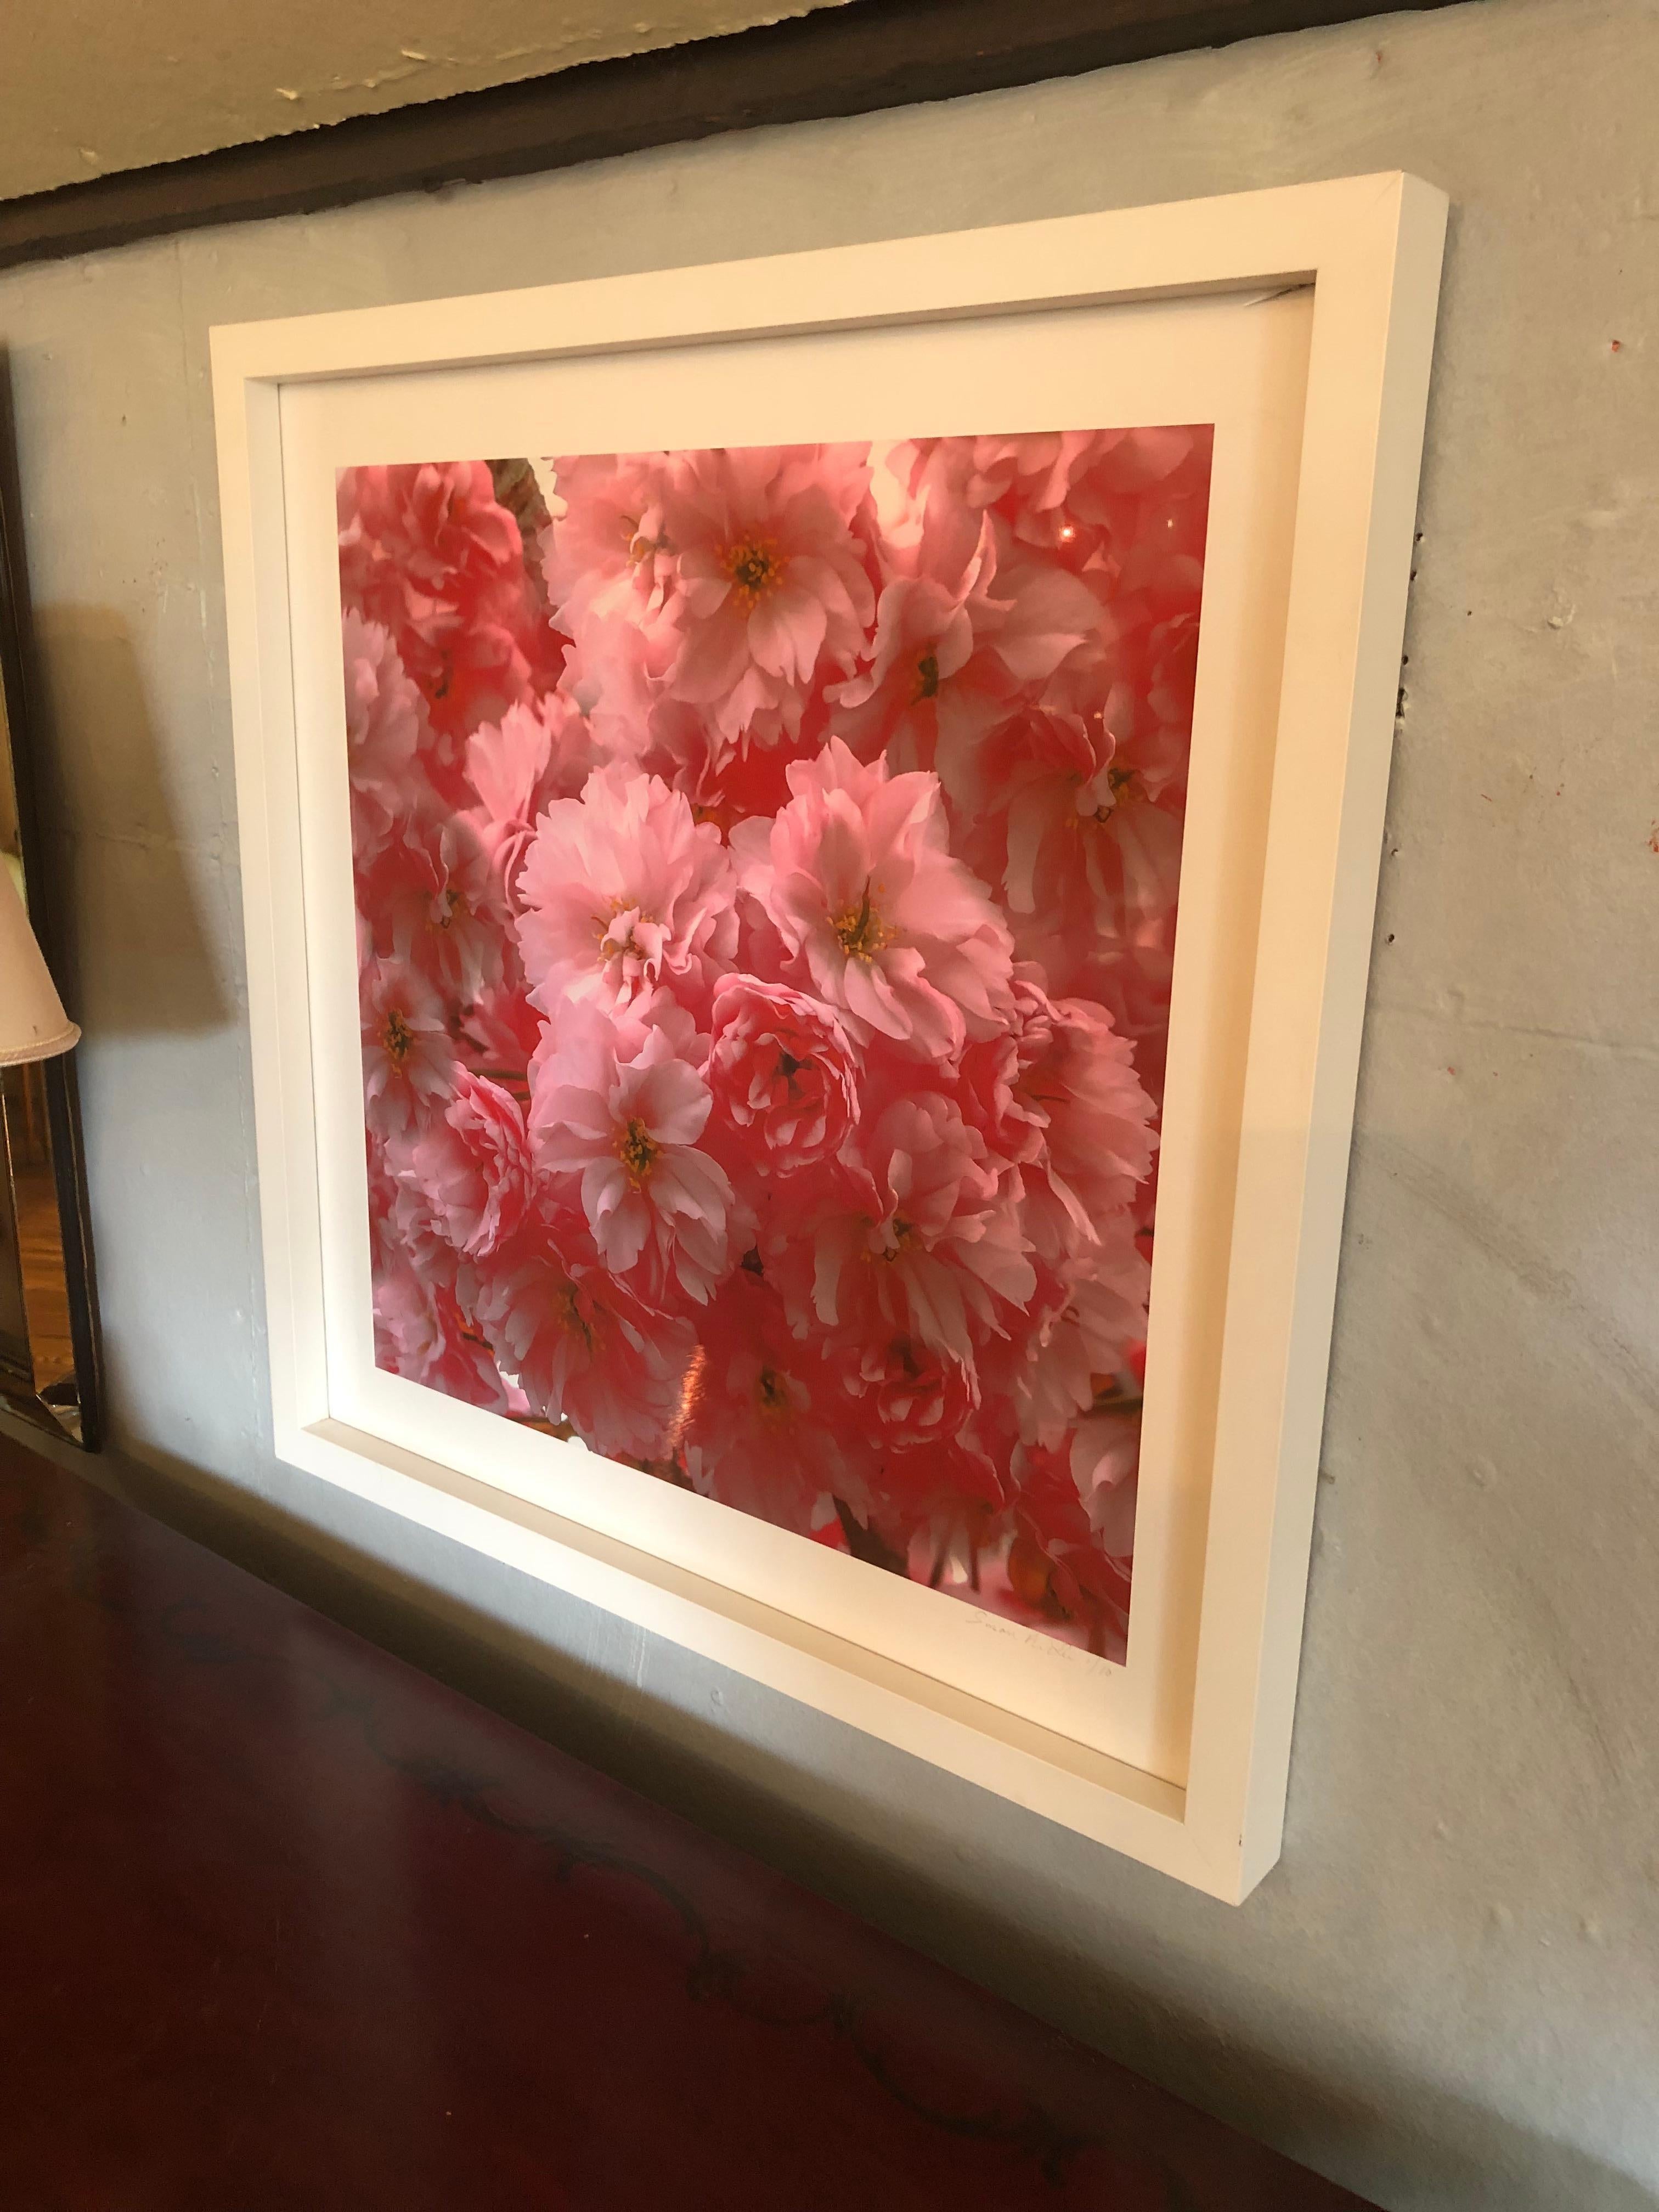 Paper Fragrant Limited Edition High Rez Art Photograph of Cherry Blossoms For Sale